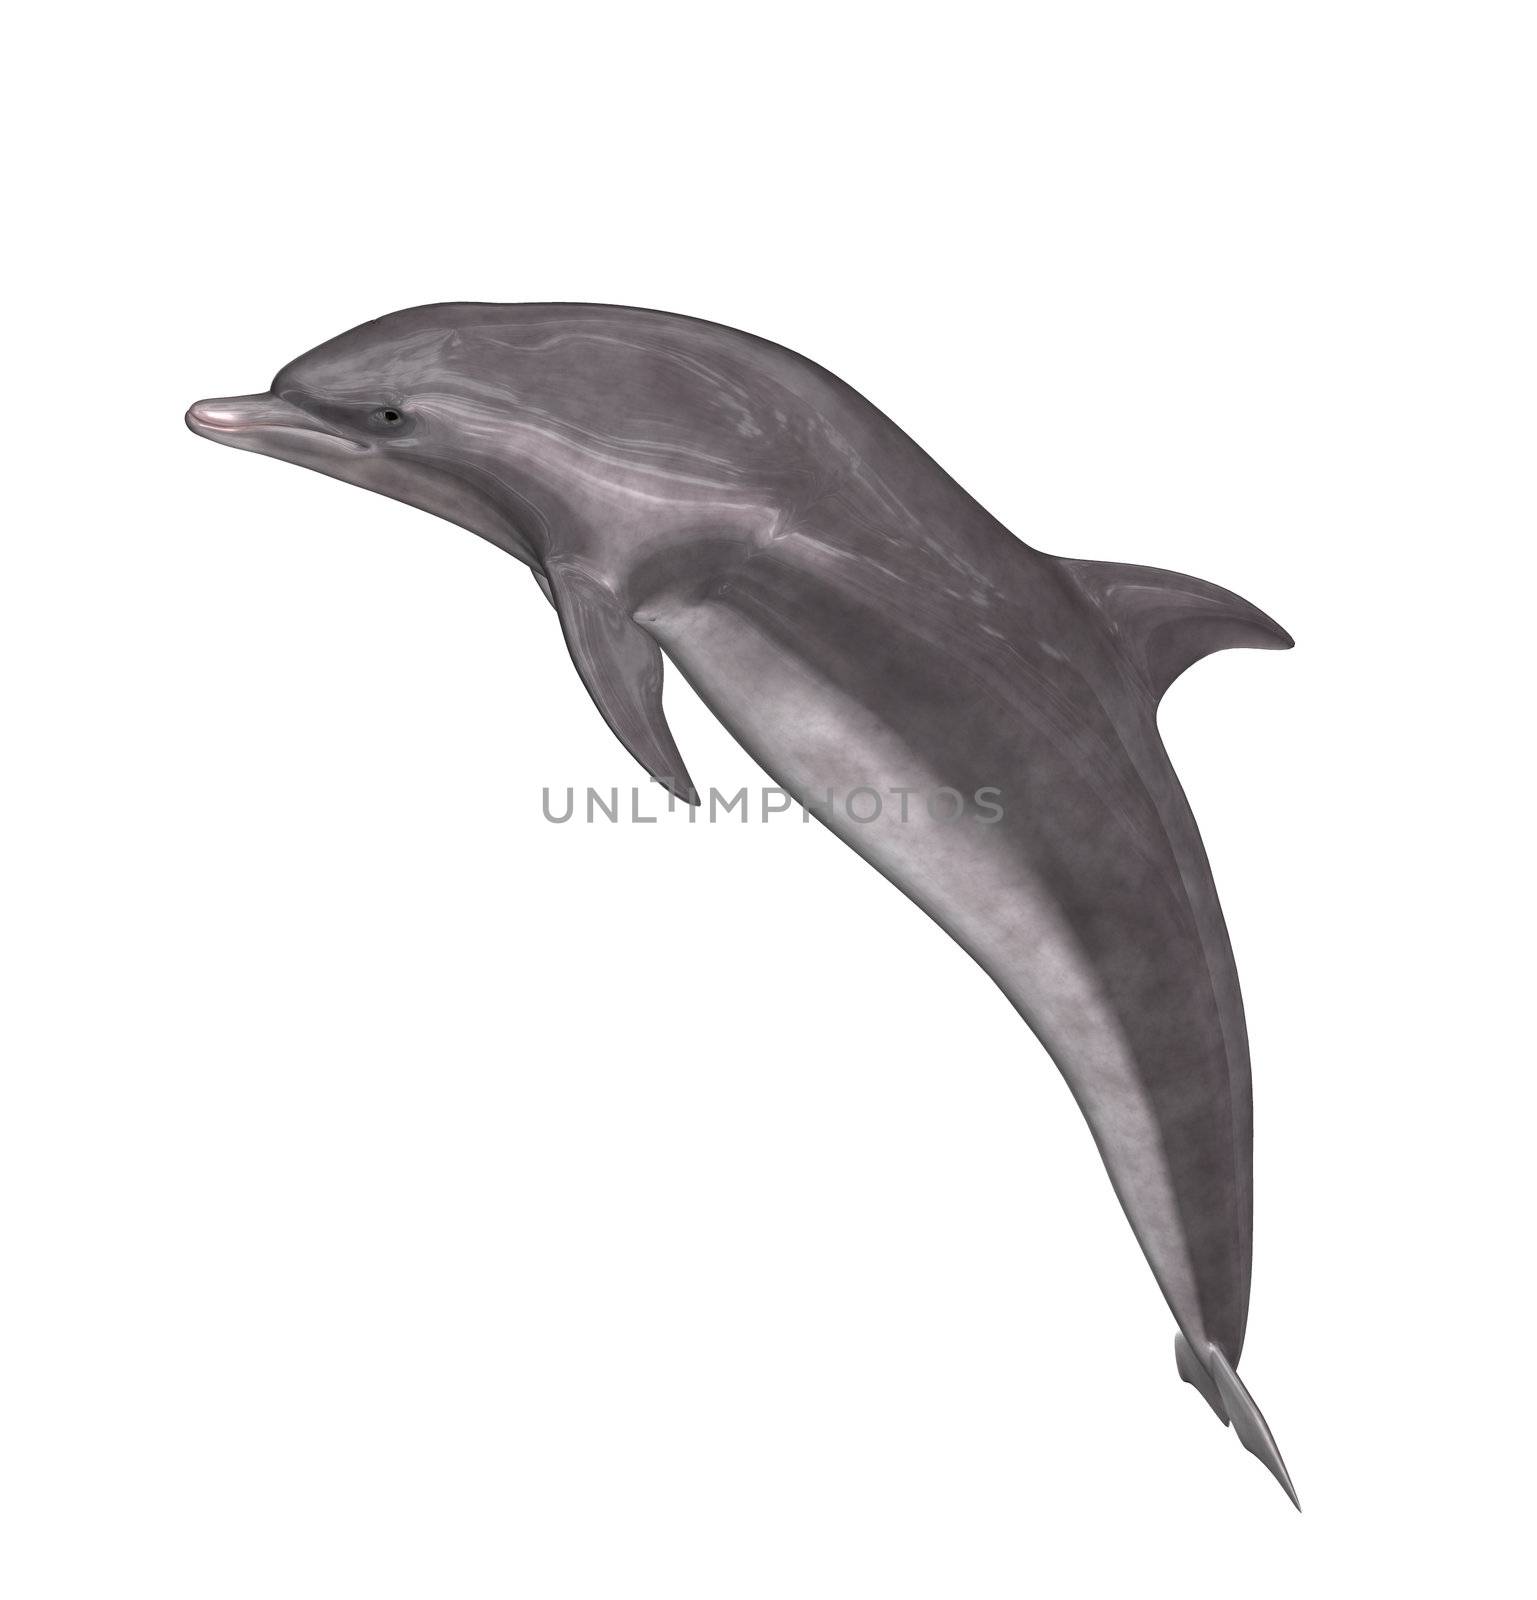 A grey and white dolphin